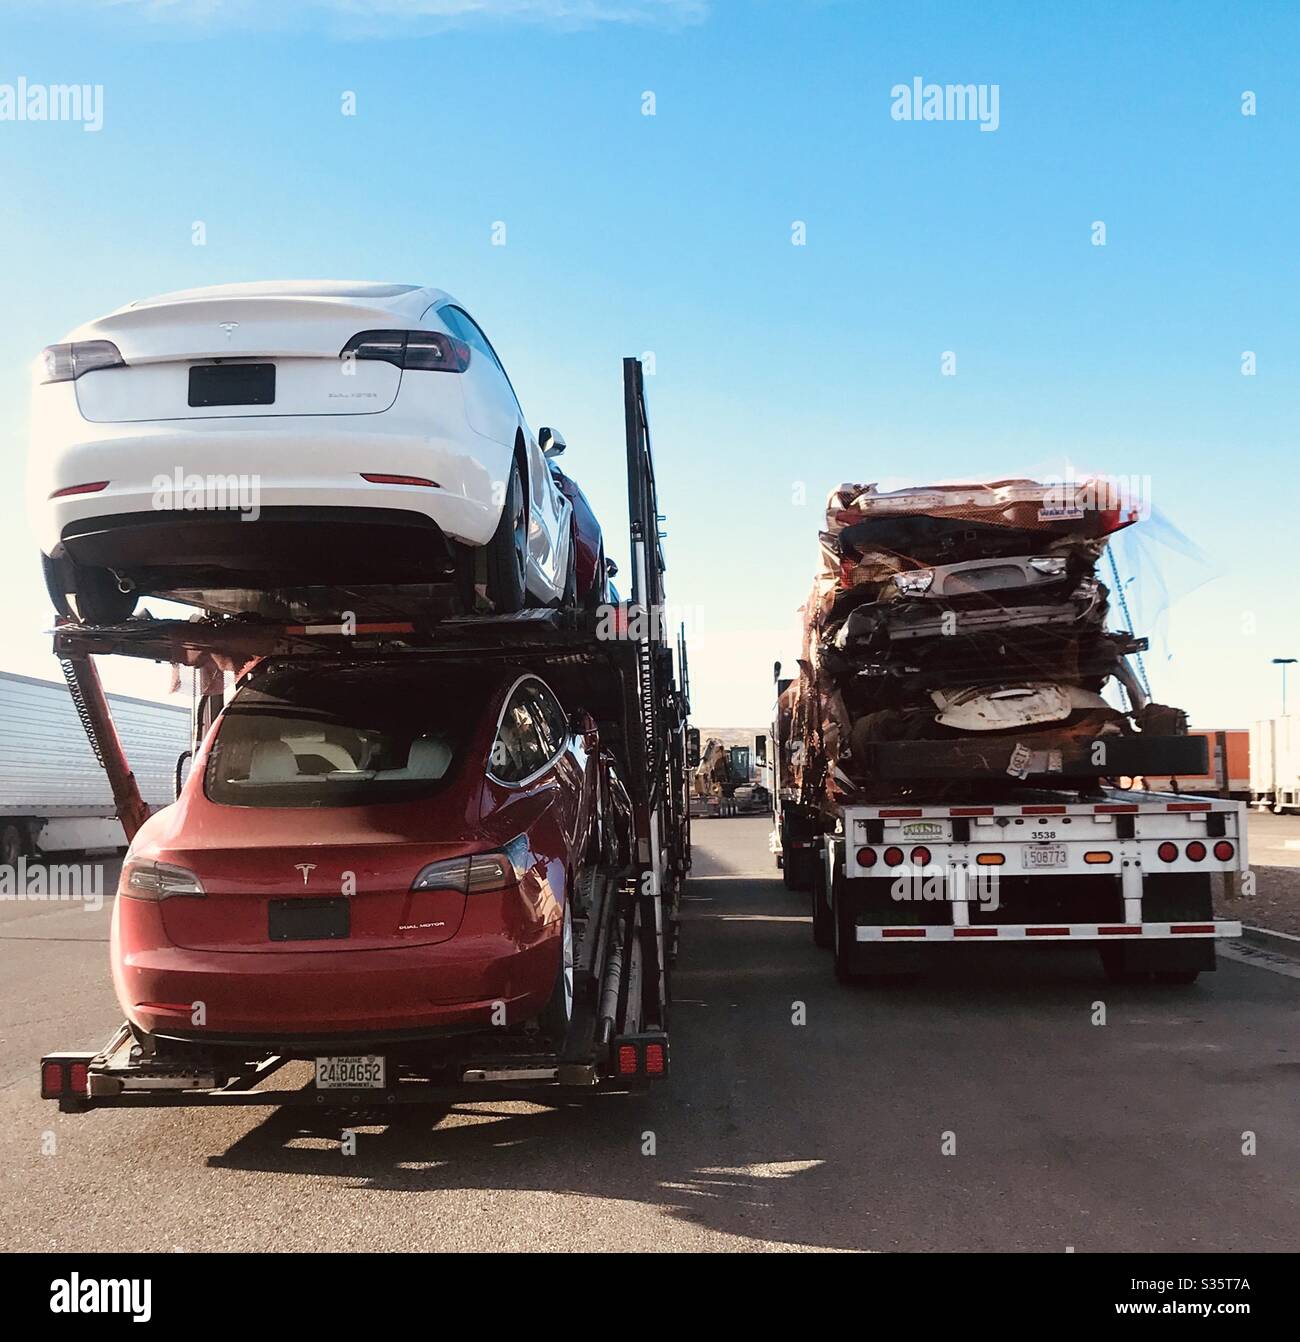 Two semi trucks next to each other, one carrying brand new modern Tesla cars, and the other smashed up old cars. Stock Photo